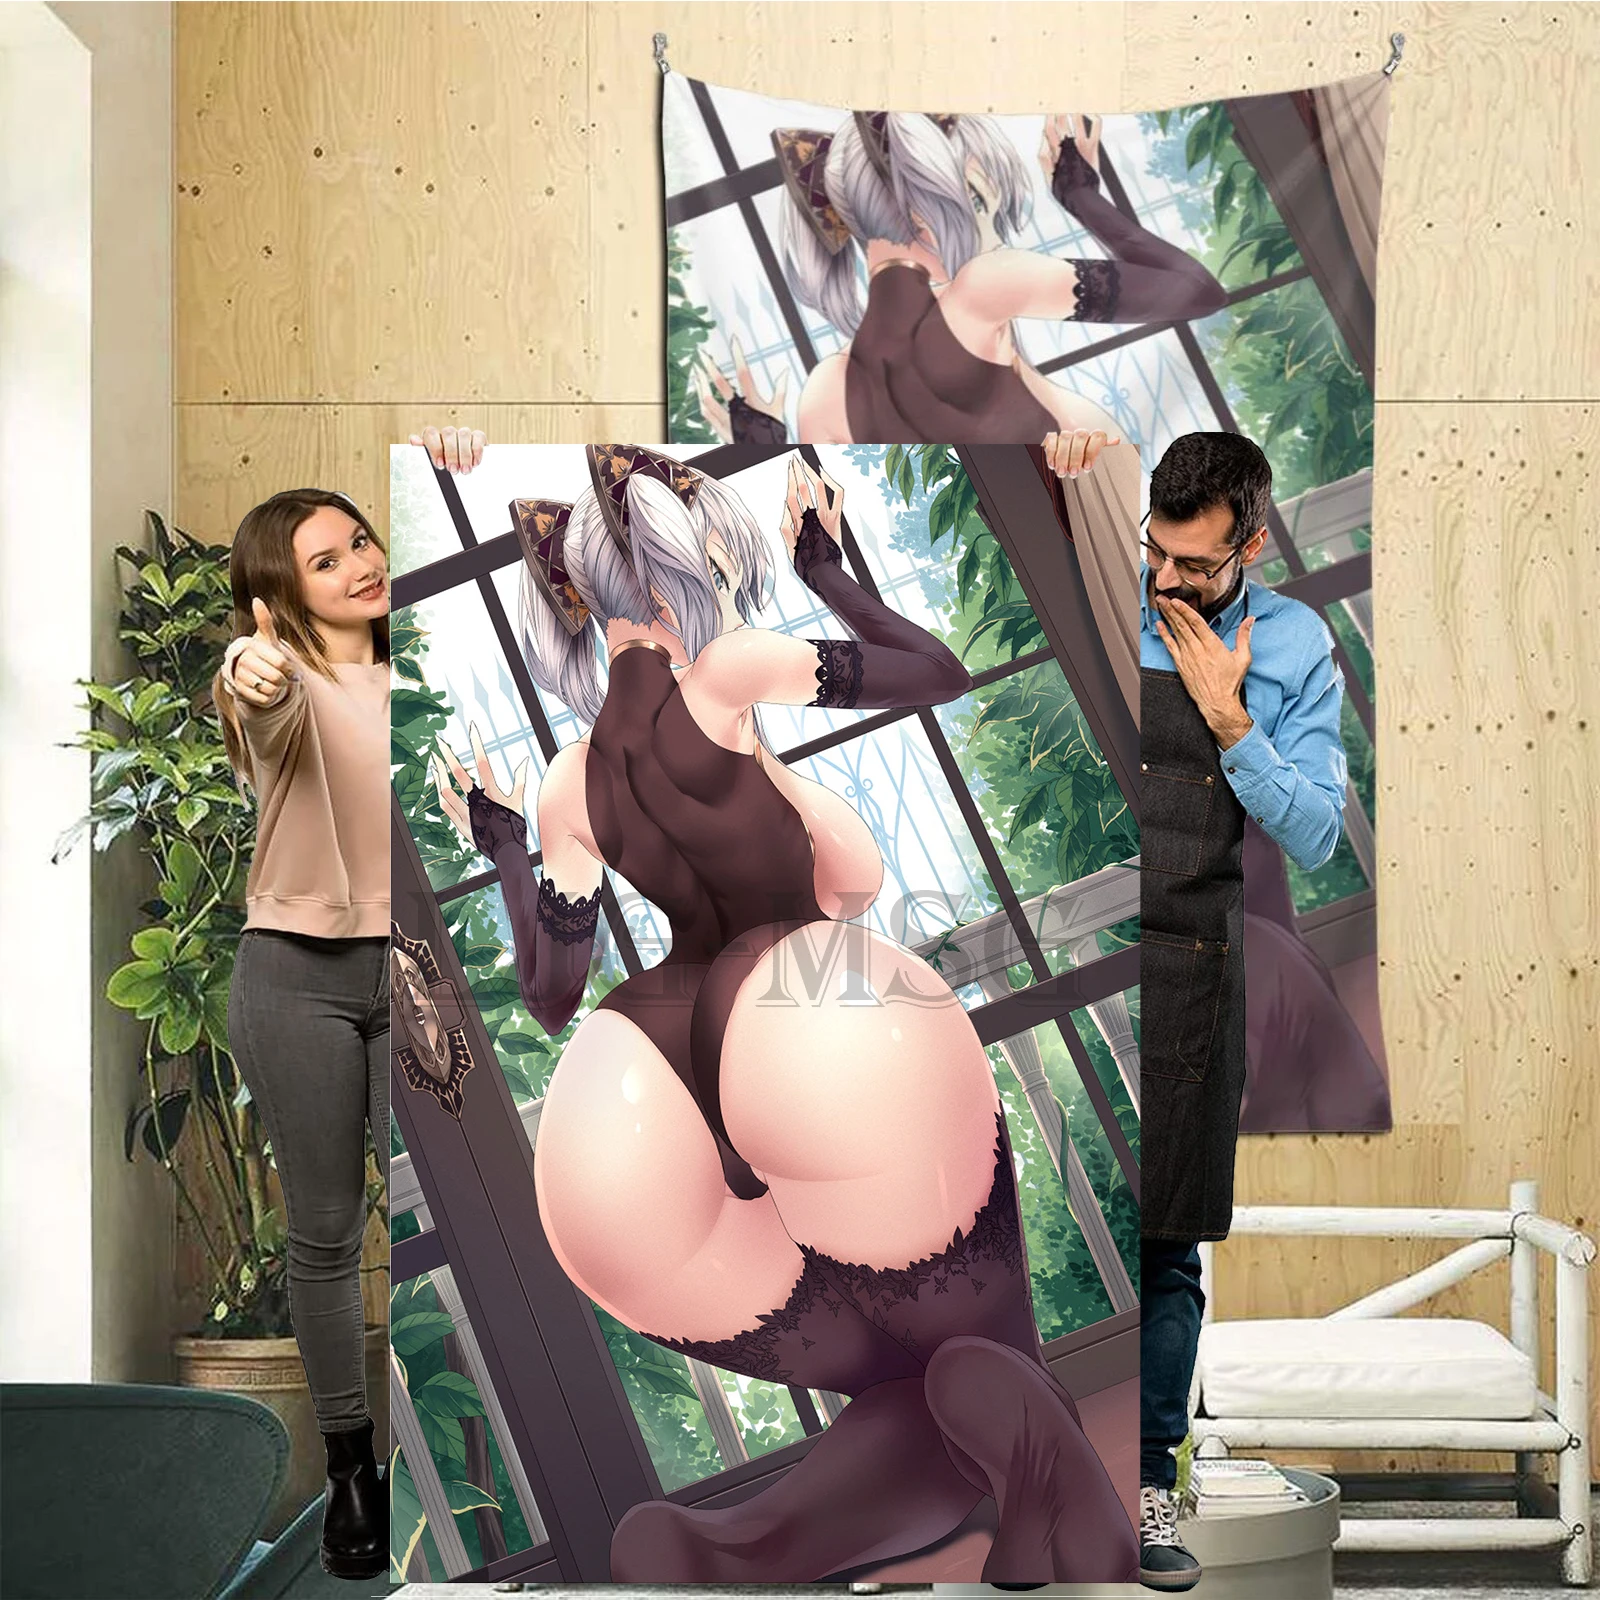 

Hentai Anime Poster Tapestry Animation Room Decor Pixiv Artist CG Wall Decor Exhentai Sexy Adult Doujin Illustration Decoration